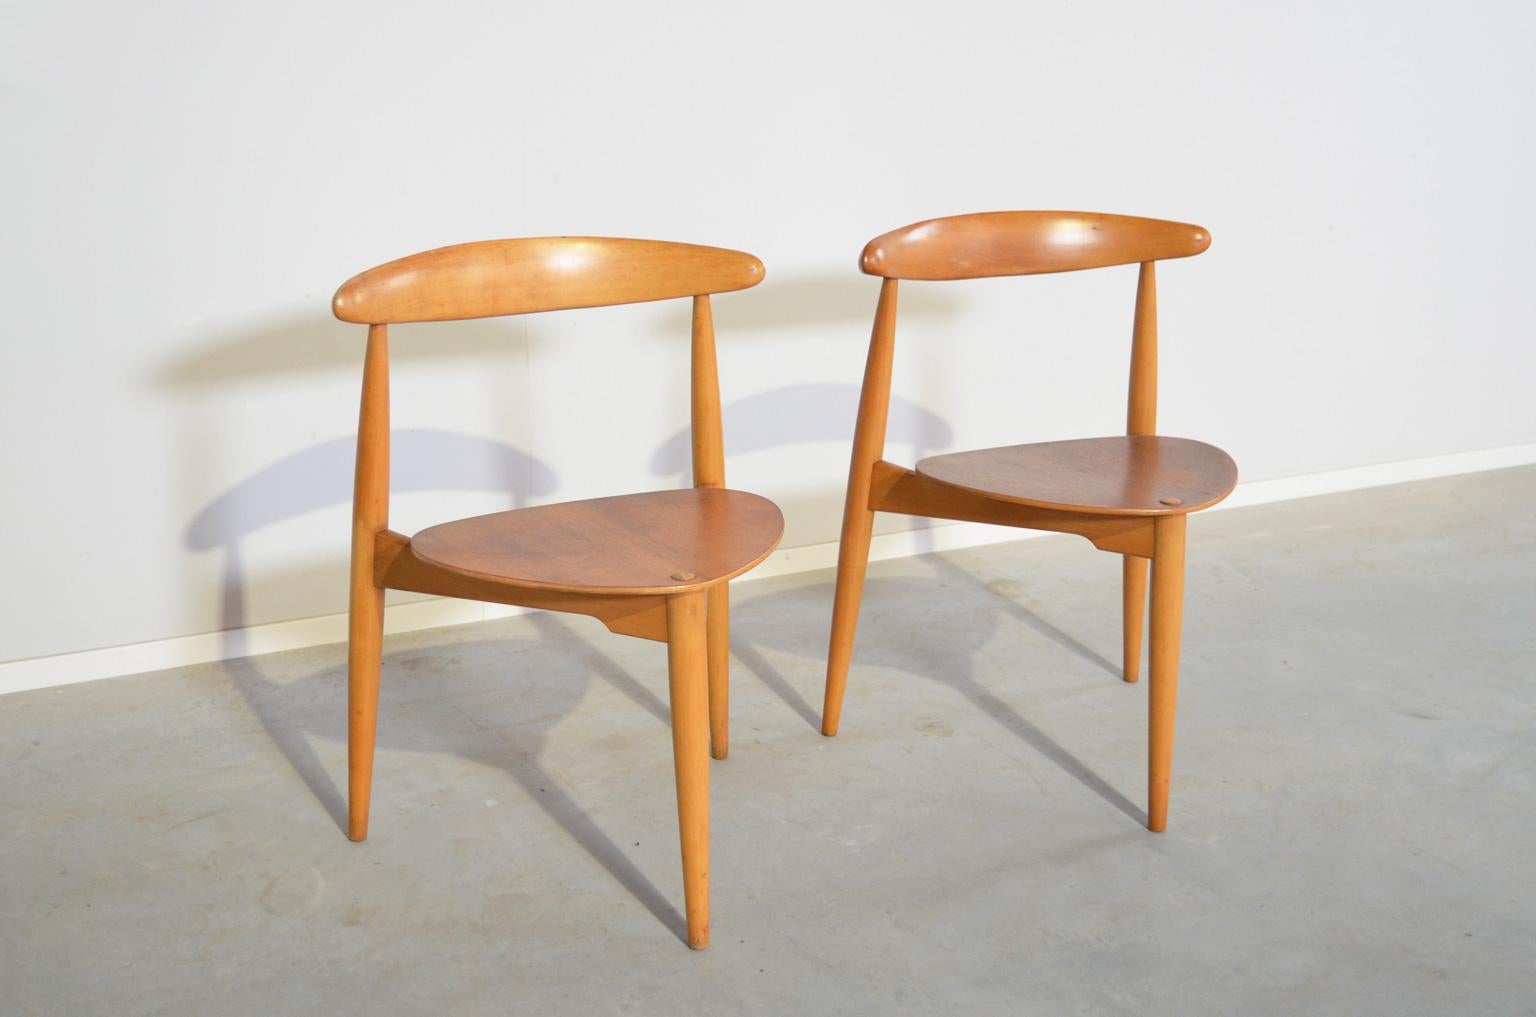 The three-legged Heart chair by Danish designer Hans Wegner is also known as model FH4103 for Fritz Hansen. Designed in a wonderful combination of beech (frame) and teak (seat) and recognizable by the distinctive Hans Wegner lines and craftsmanship. 